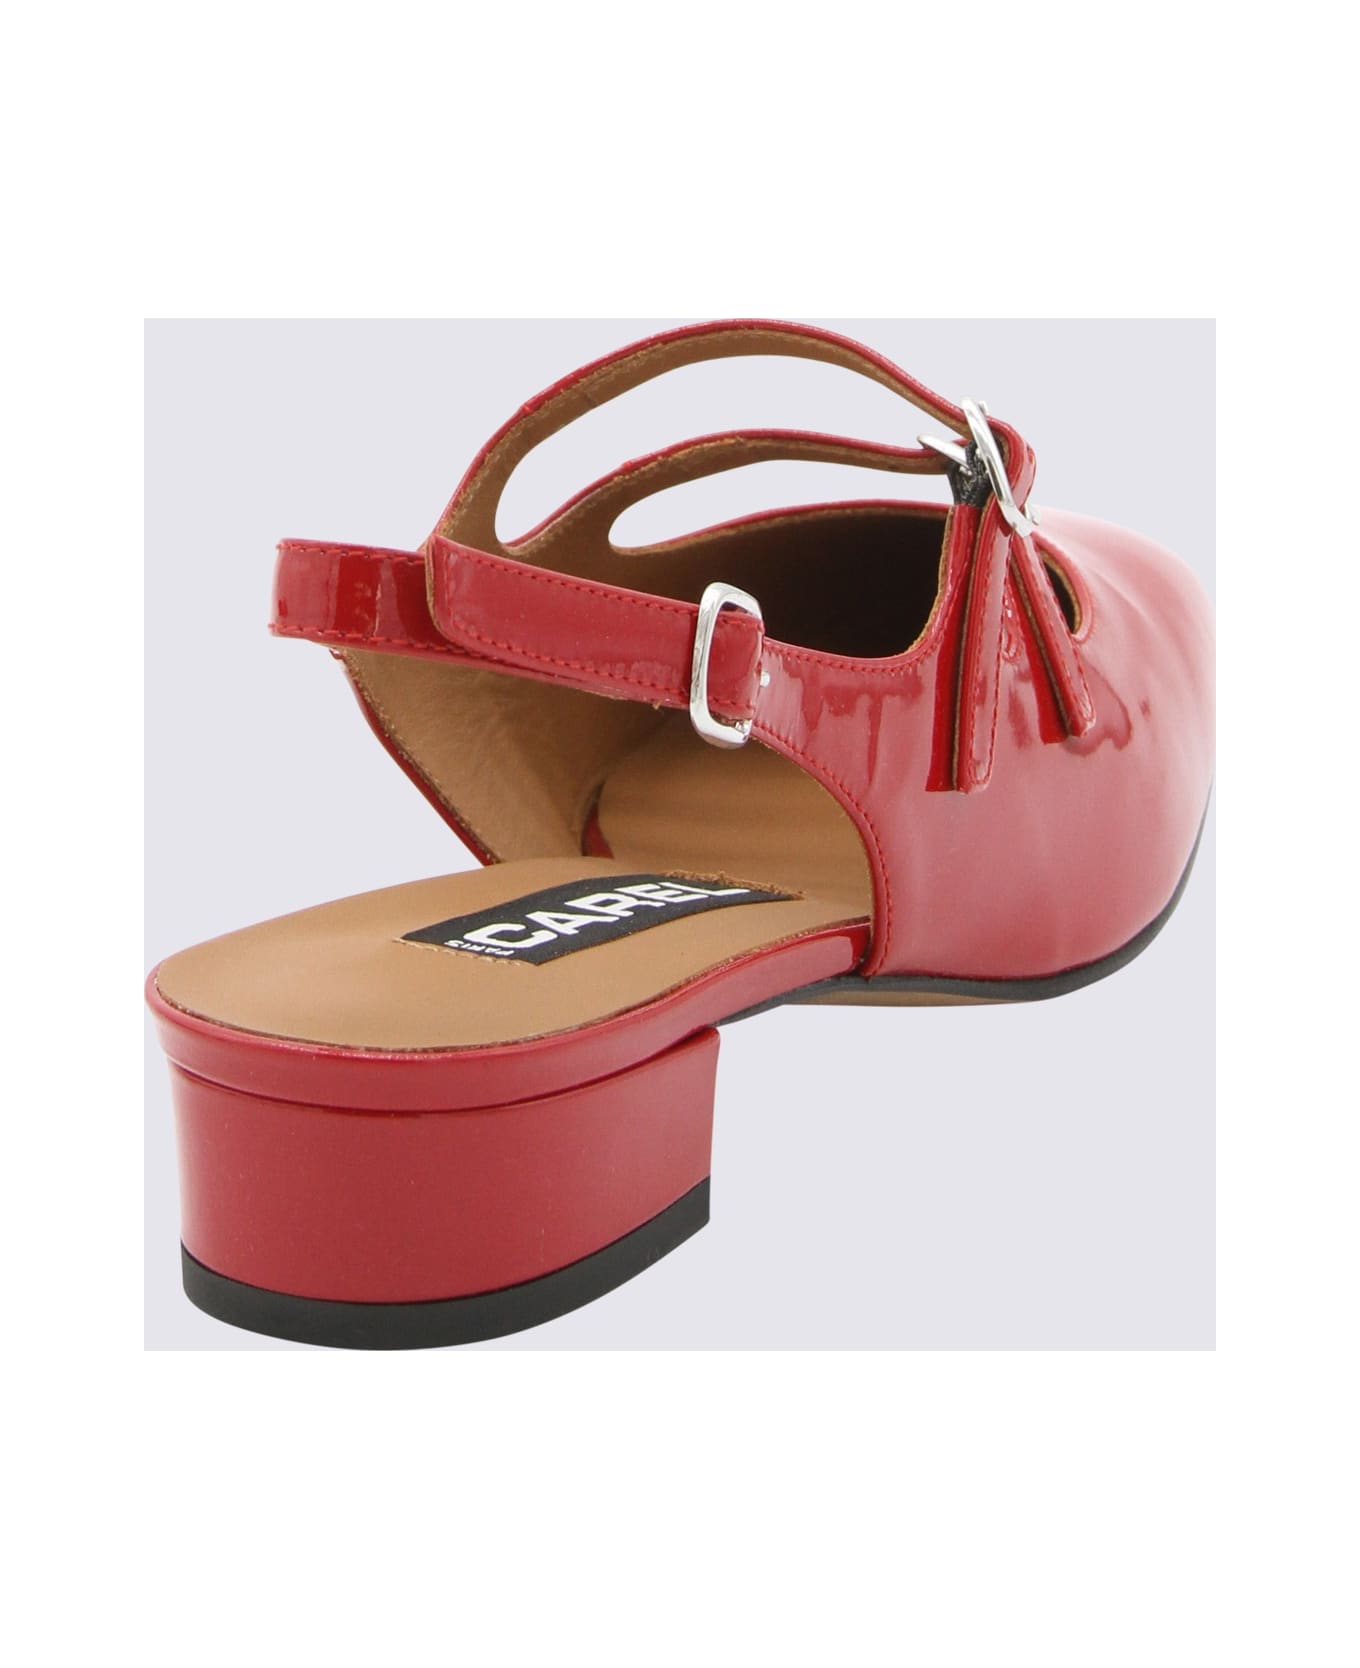 Carel Red Leather Slingback Mary Janes Pumps